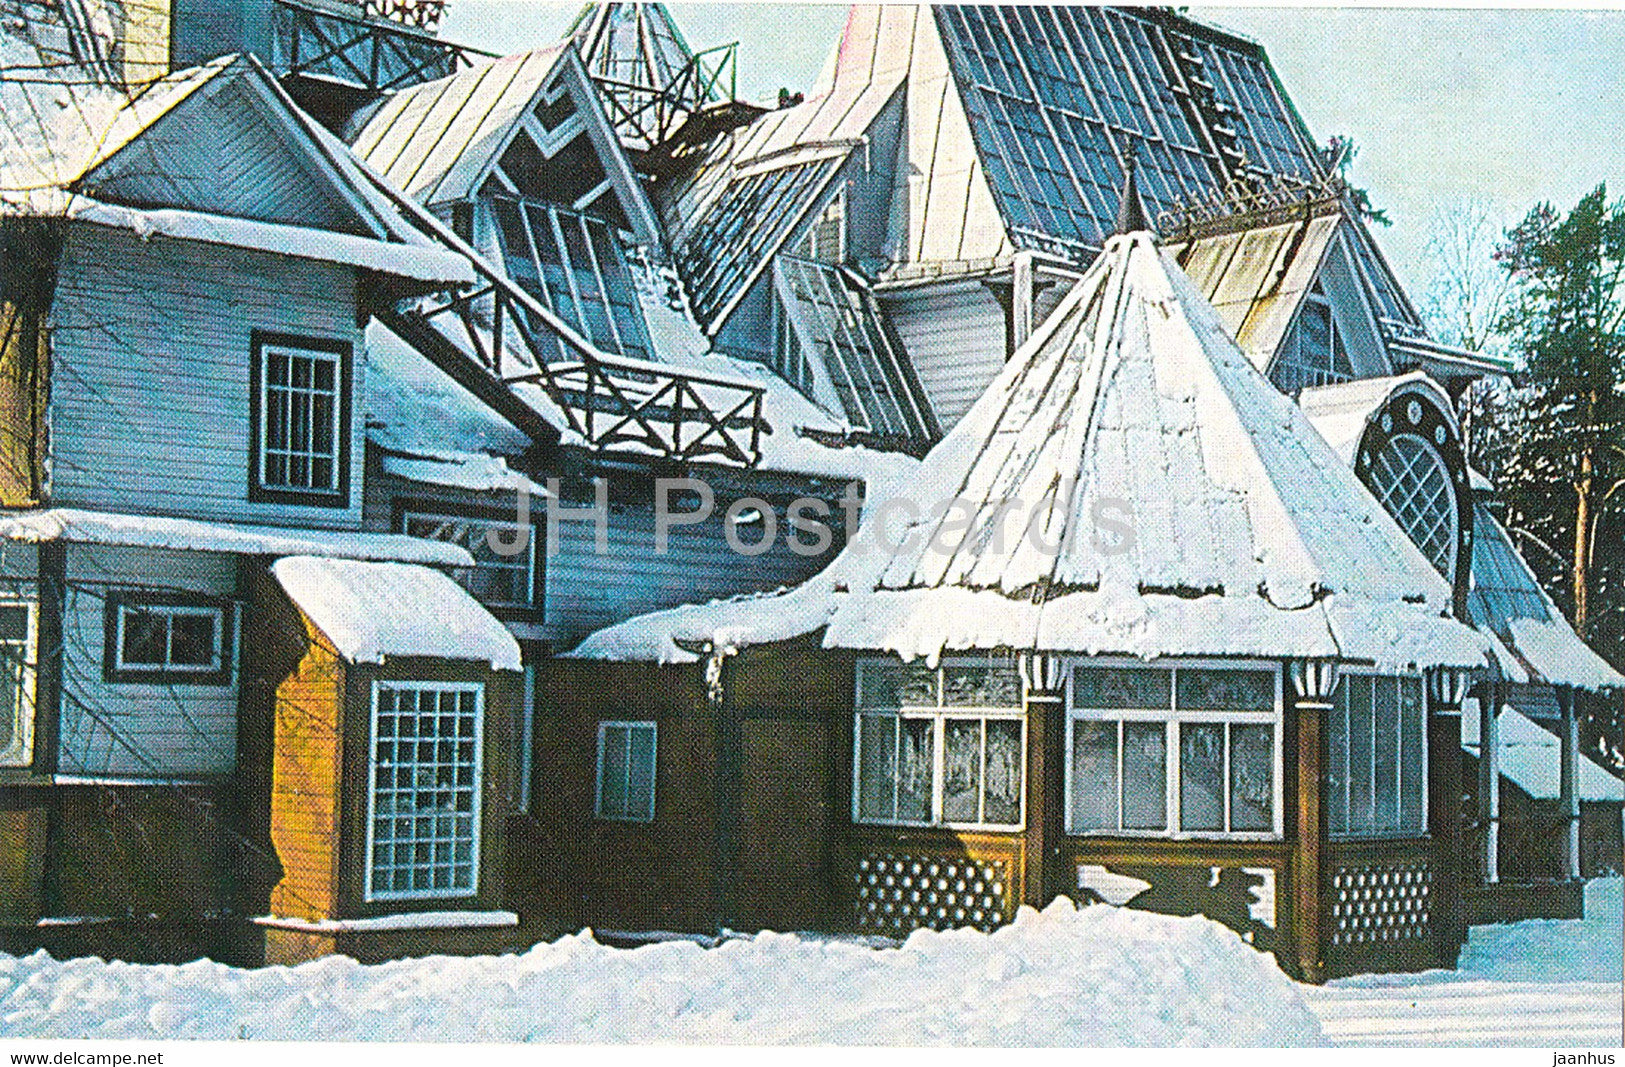 Penaty Estate Museum of Russian Artist Ilya Repin - View of North side of house - 1975 - Russia USSR - unused - JH Postcards